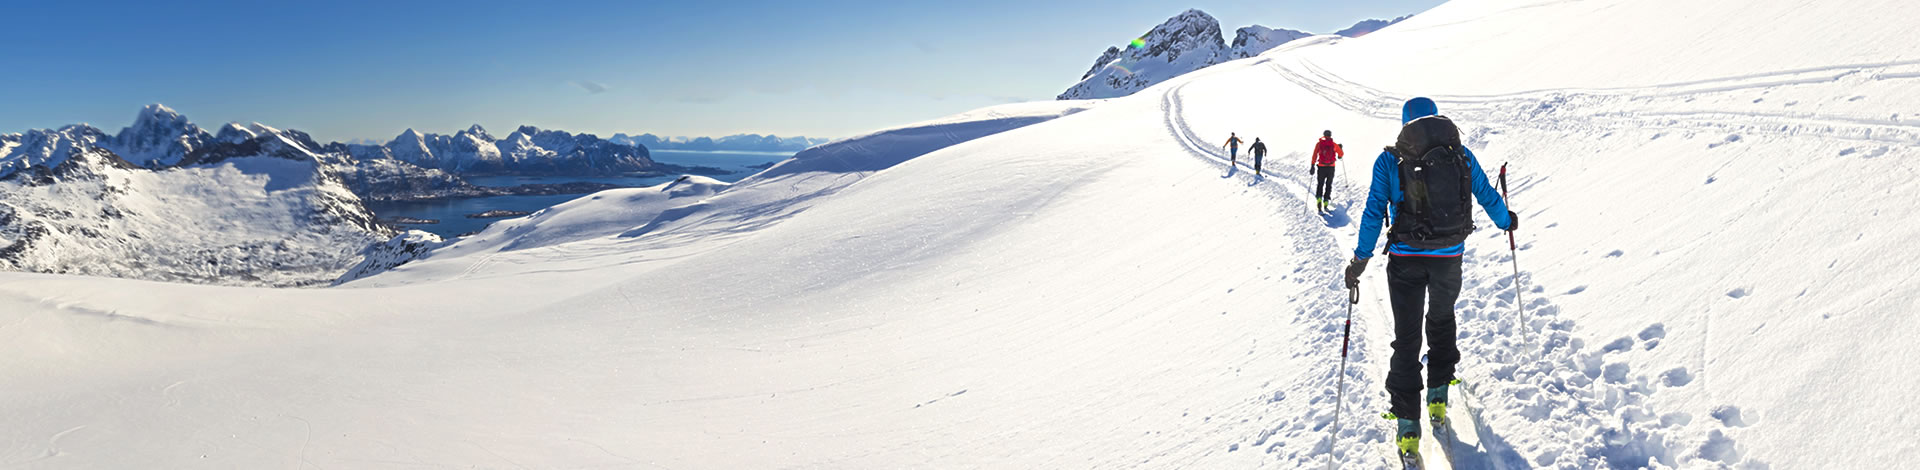 Alternatives to skiing on the slopes